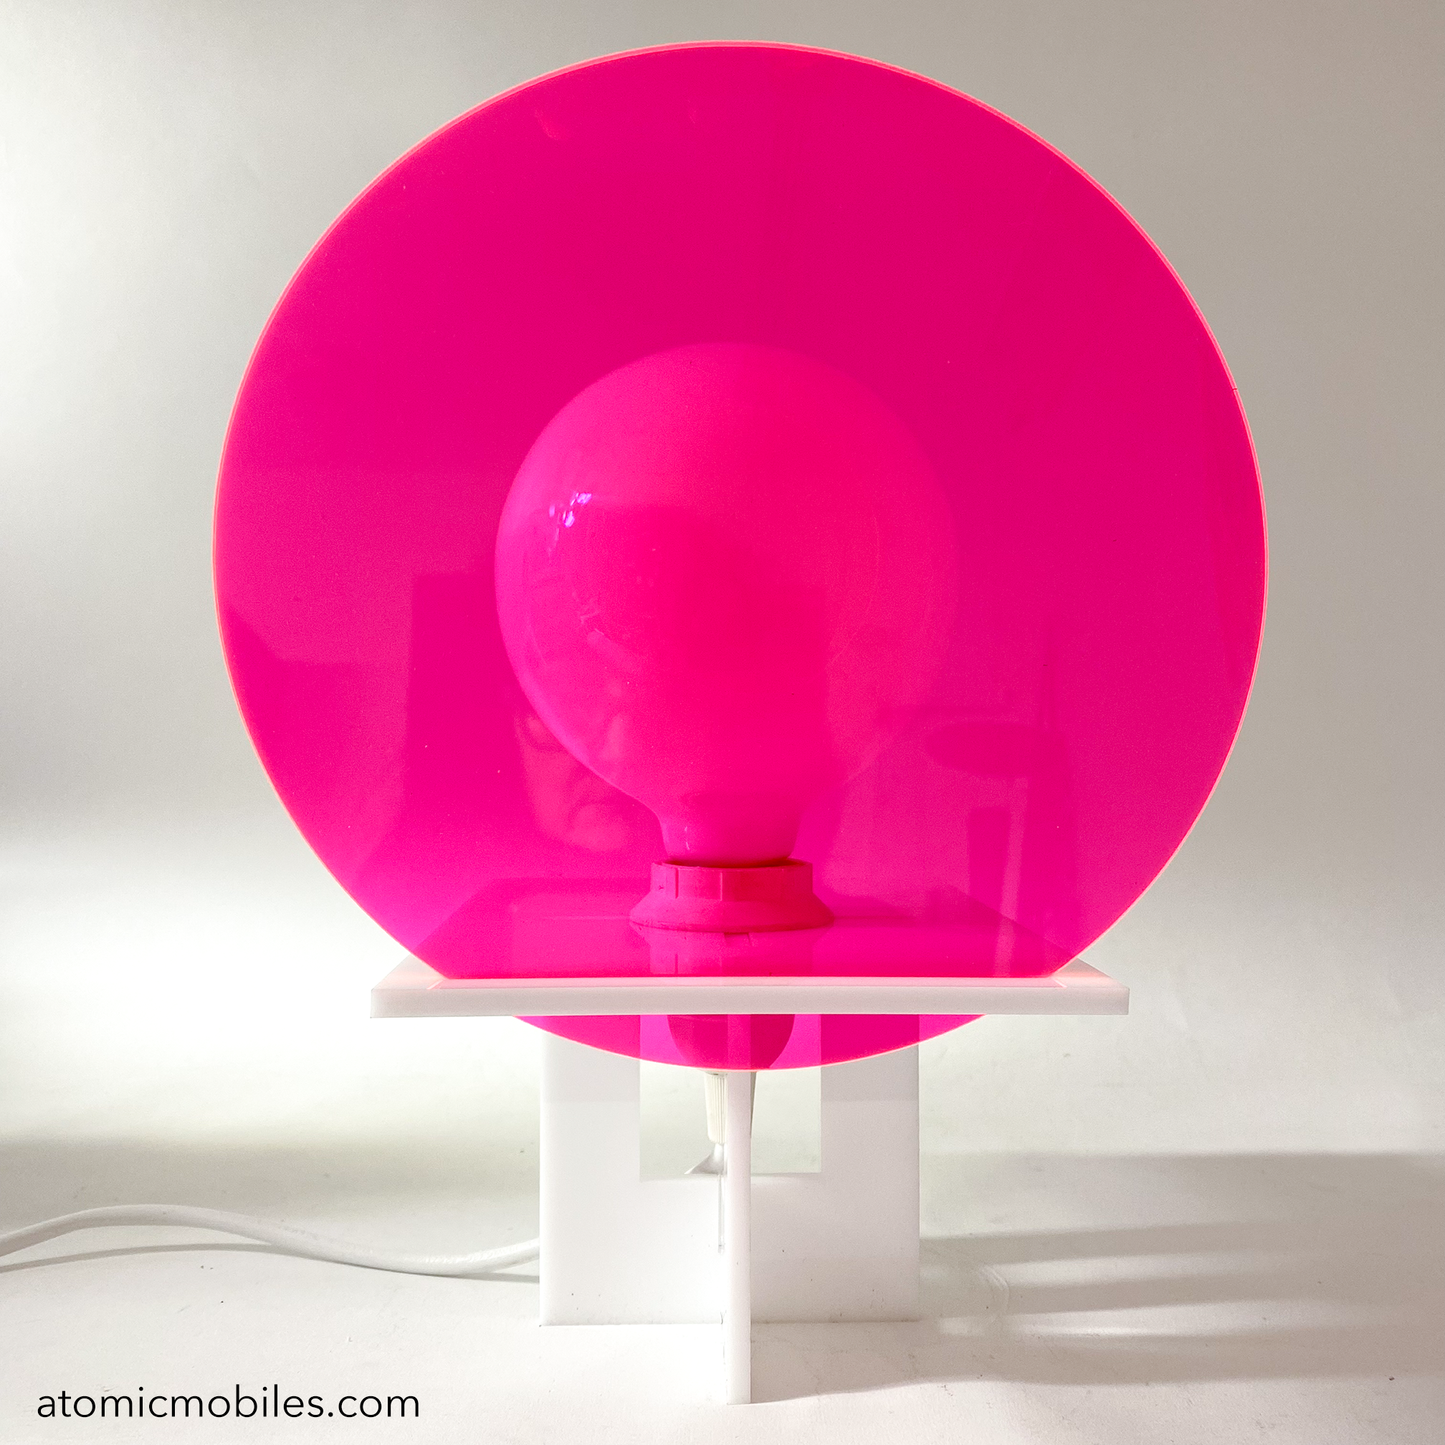 RETROSPECT Space Age Lamp by AtomicMobiles.com with Fluorescent Pink Neon round lens cover over globe light bulb